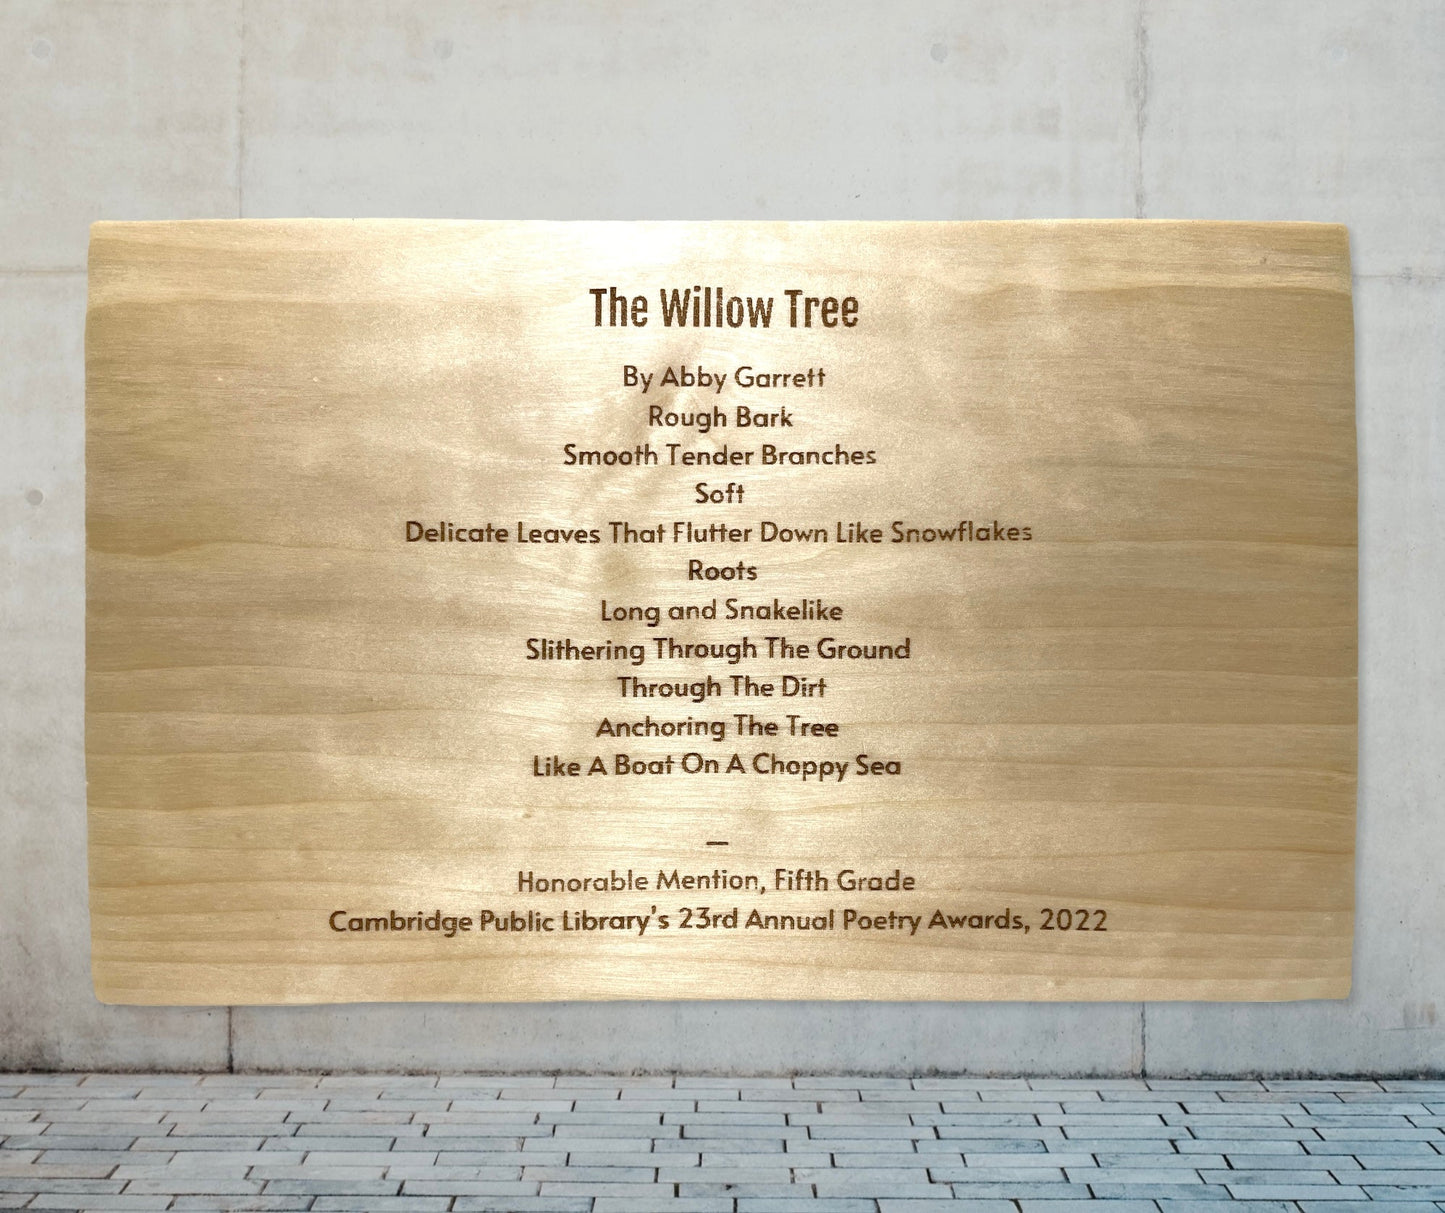 Willow Tree Customized Sign Signs Weaver Custom Engravings   